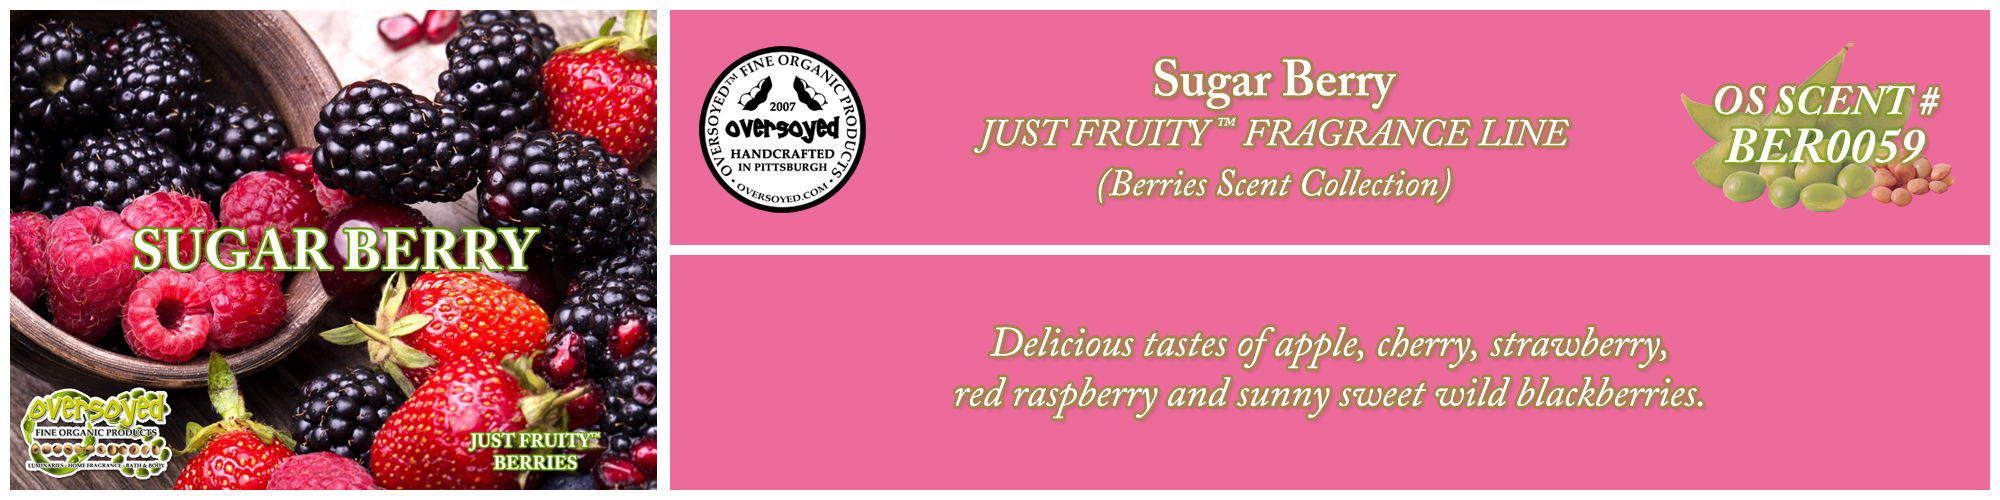 Sugar Berry Handcrafted Products Collection